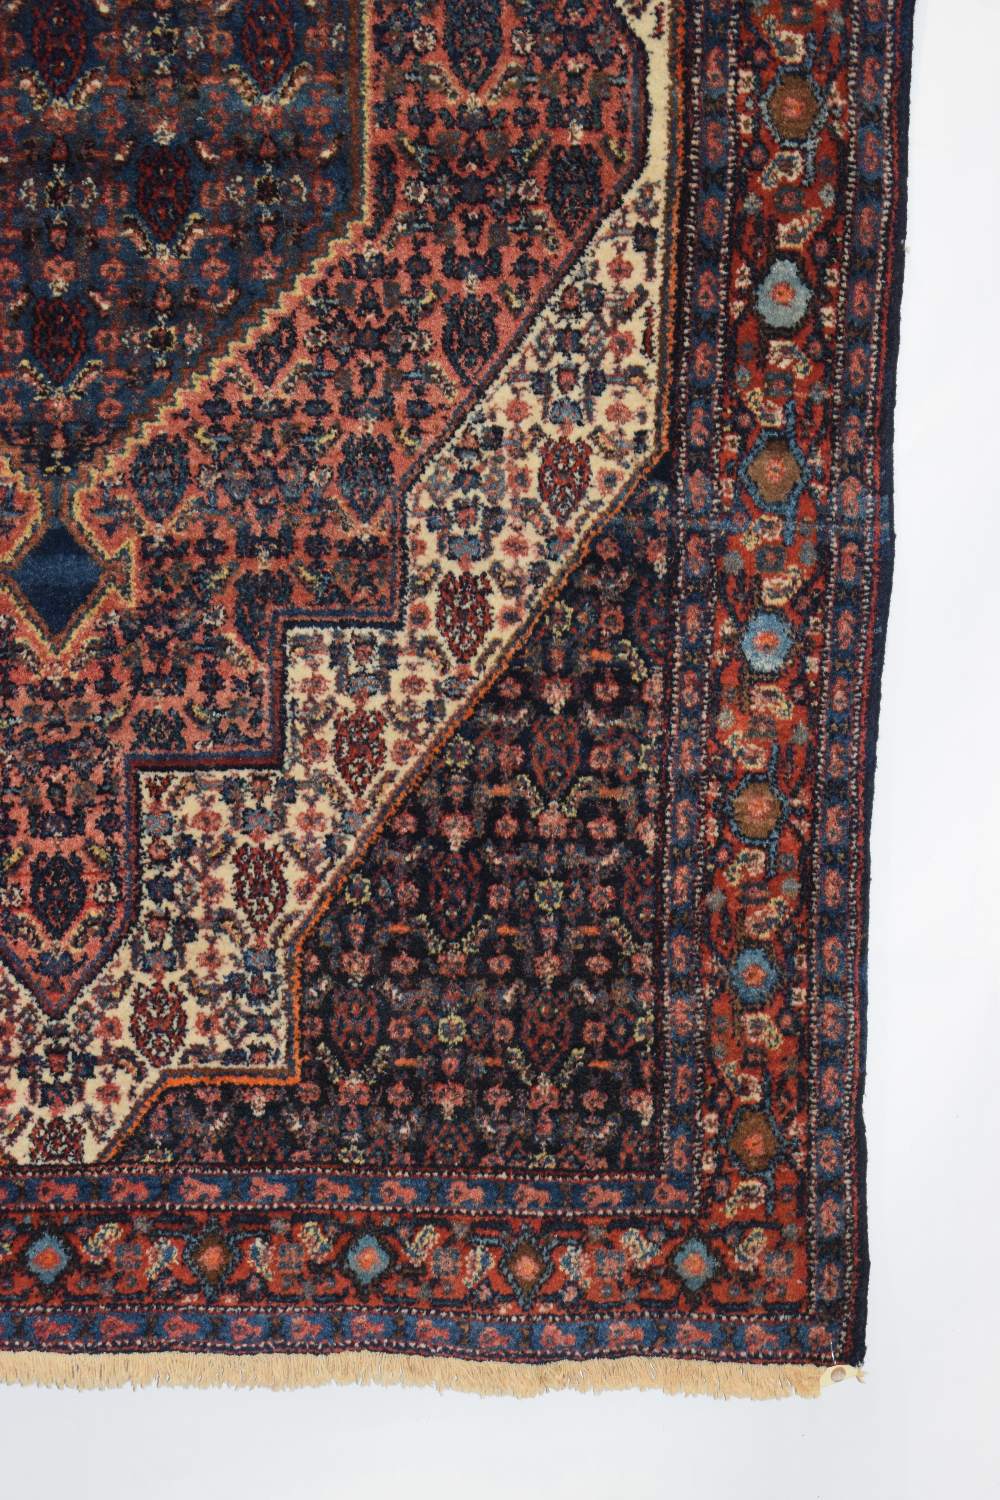 Senneh rug, Hamadan area, north west Persia, circa 1930s-40s, 6ft. 6in. X 4ft. 6in. 1.98m. X 1. - Image 2 of 10